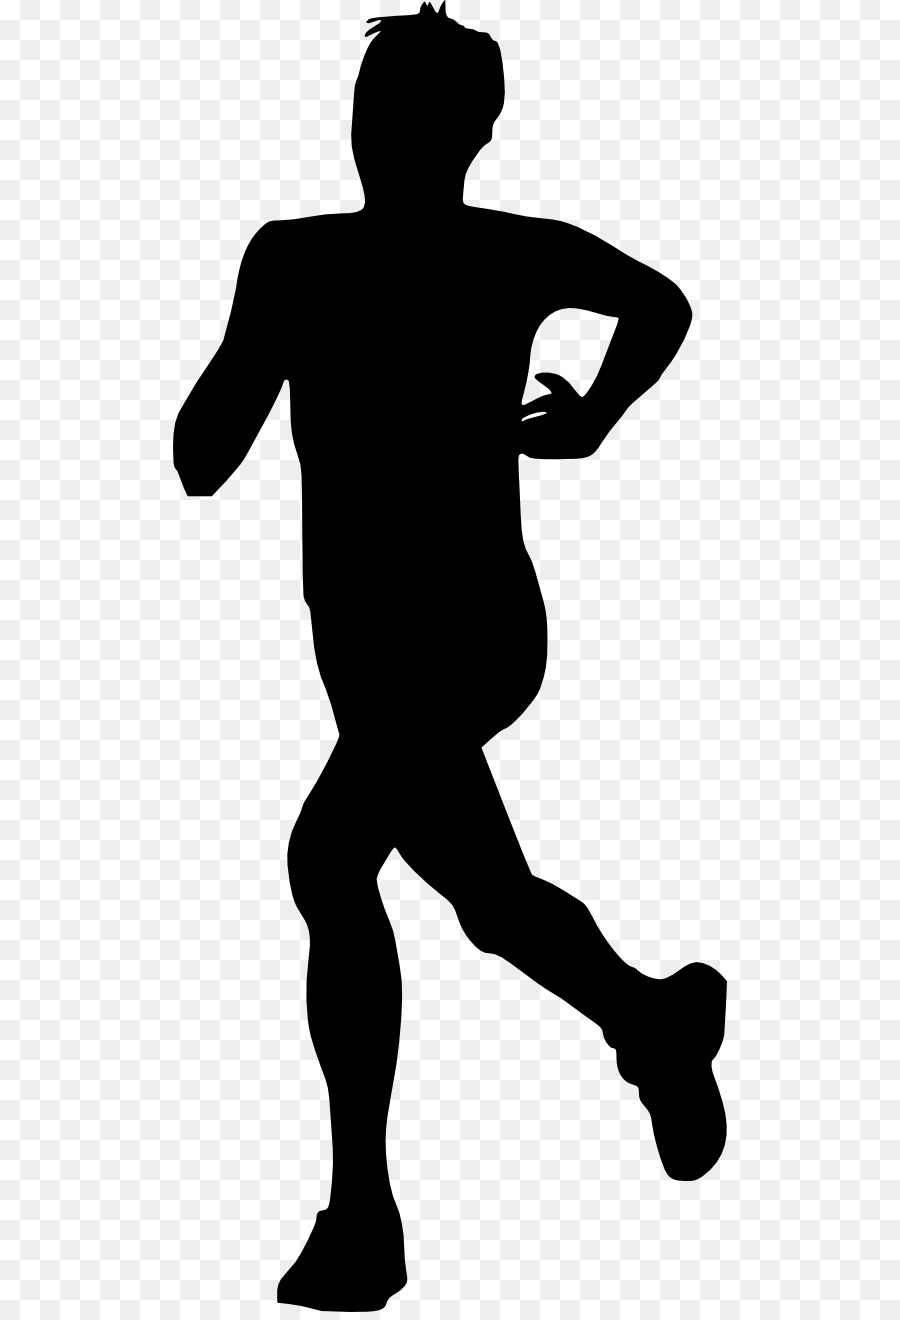 Football player Silhouette Clip art - running man png download - 554*1312 - Free Transparent Football Player png Download.